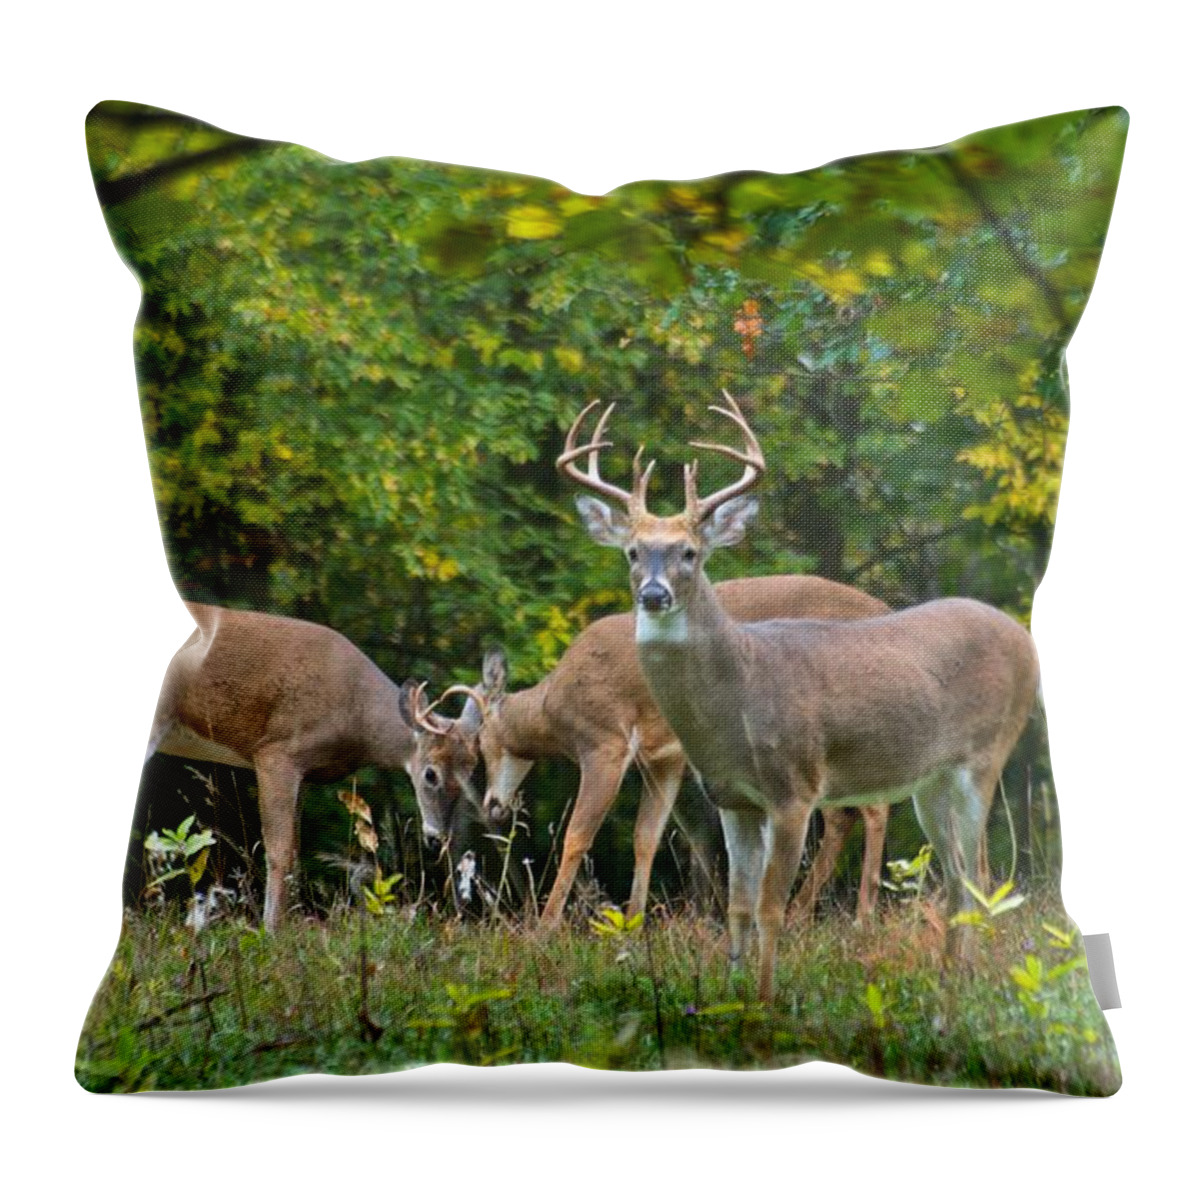 Three Throw Pillow featuring the photograph Three Bucks_0054_4463 by Michael Peychich